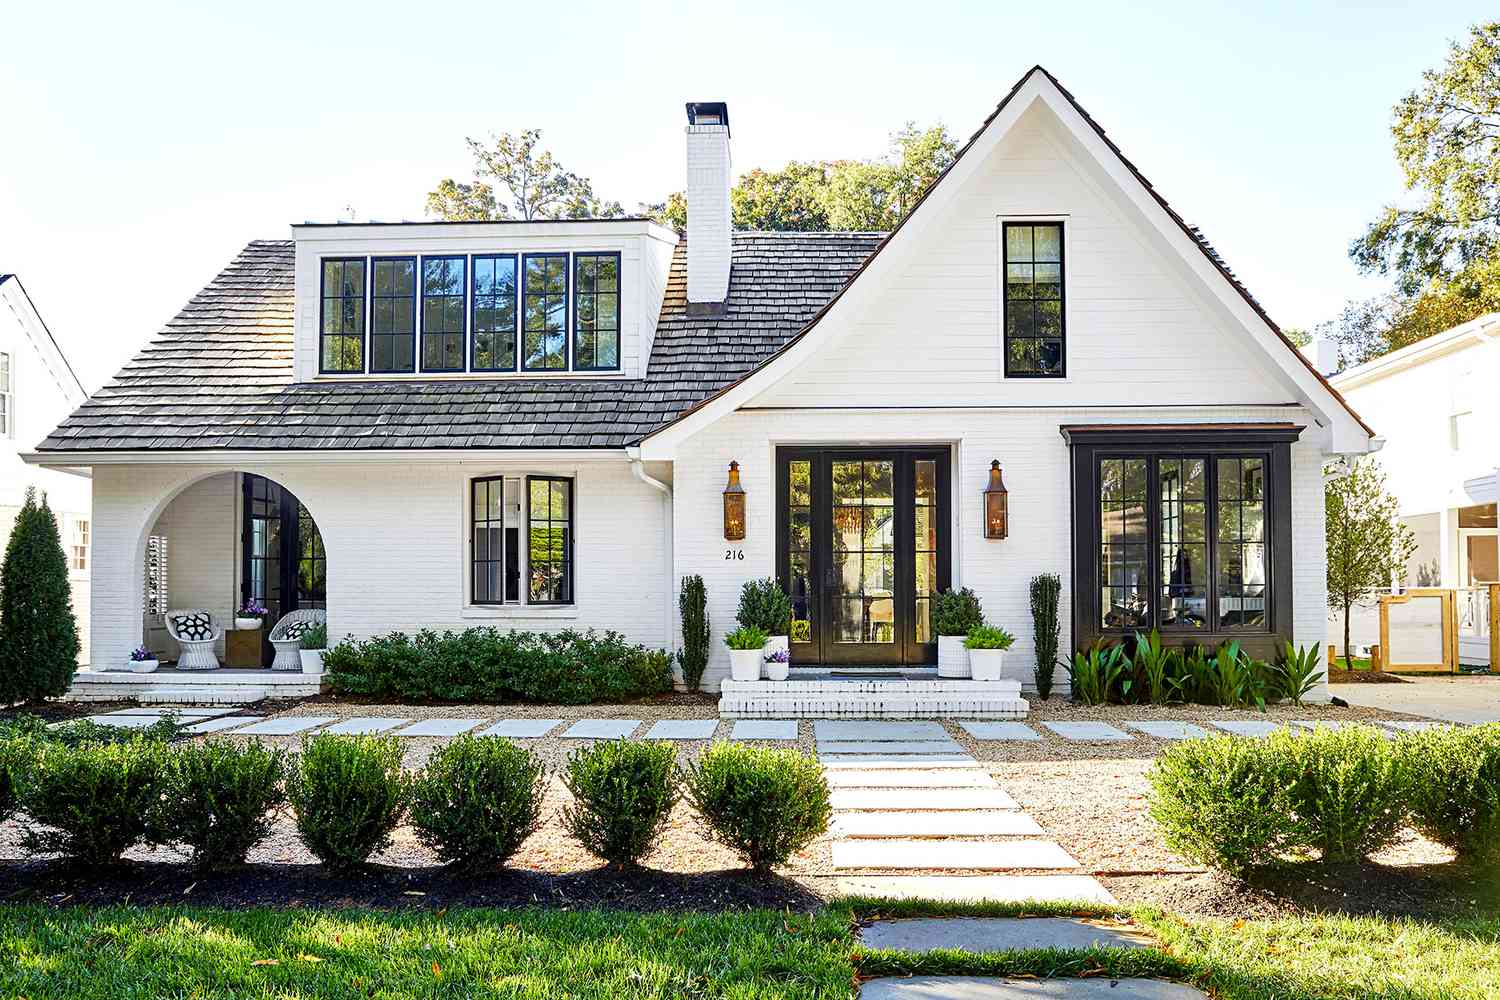 10 Home Exterior Fails You Should Know About   Architectural Digest